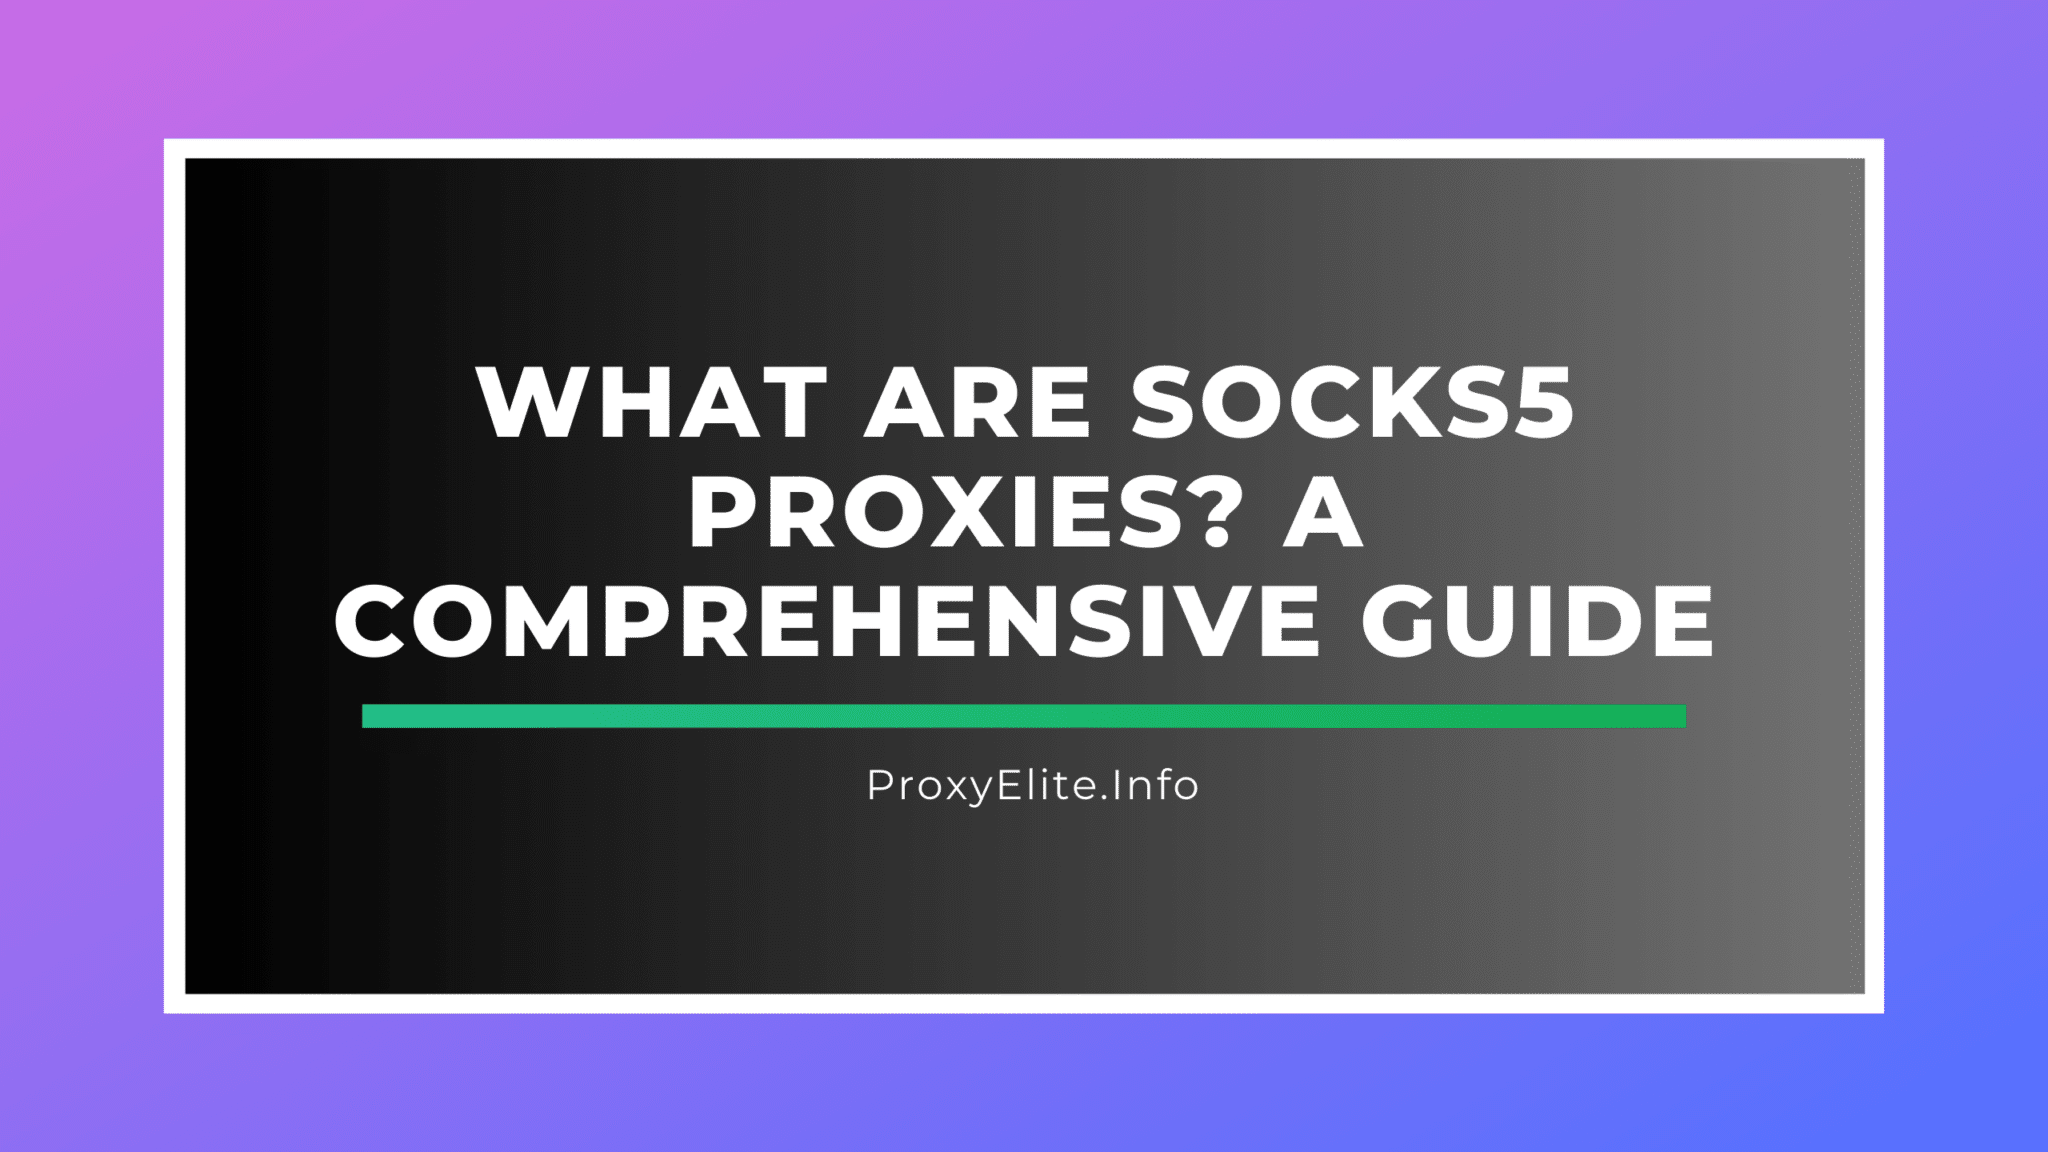 What Are SOCKS5 Proxies? A Comprehensive Guide